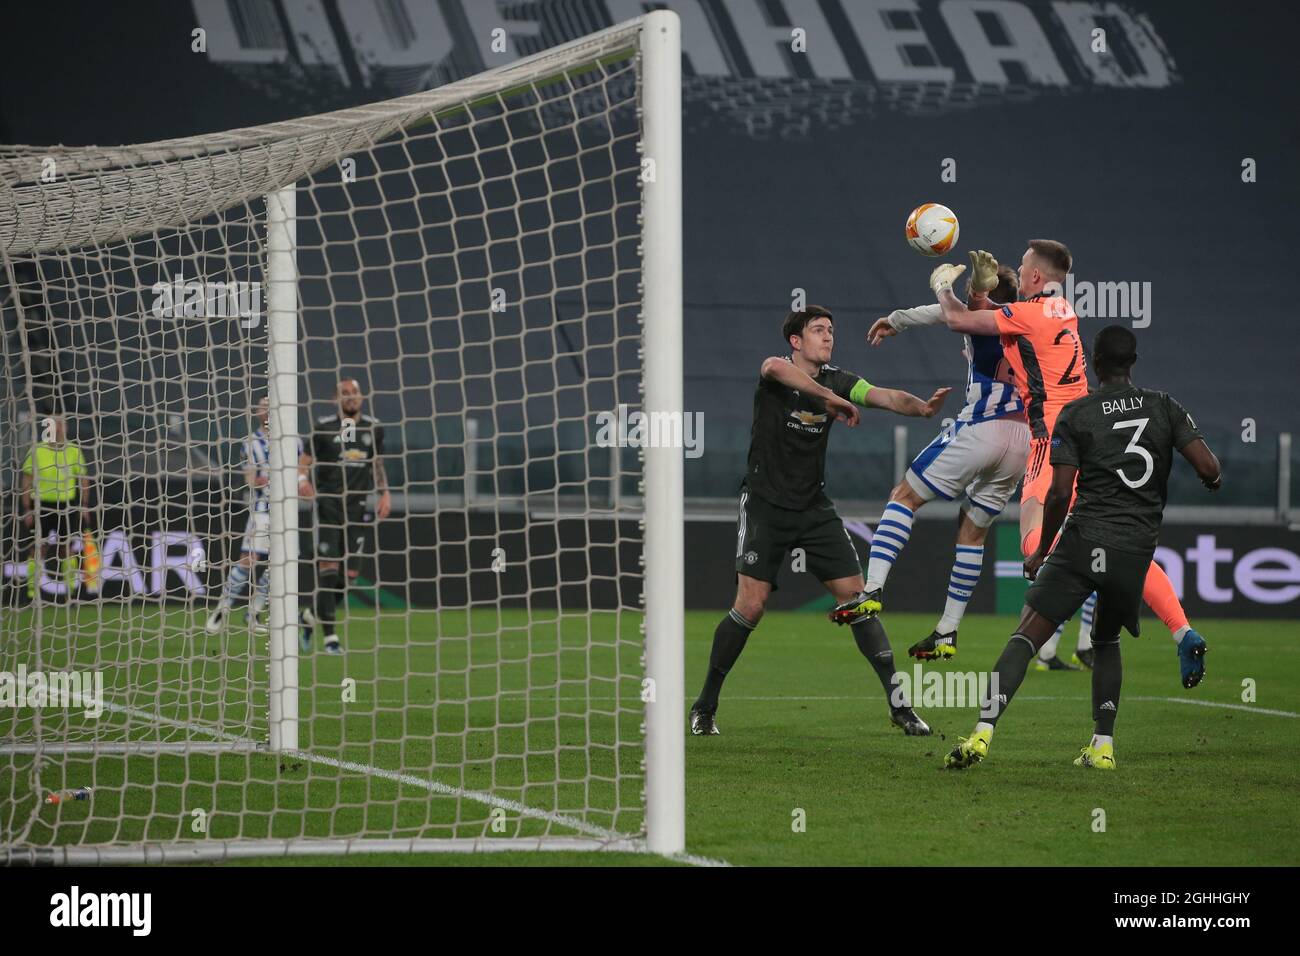 Nacho Monreal of Real Sociedad clashes with Dean Henderson of Manchester United as Harry Maguire of Manchester United looks on during the UEFA Europa League match at Juventus Stadium, Turin. Picture date: 18th February 2021. Picture credit should read: Jonathan Moscrop/Sportimage via PA Images Stock Photo